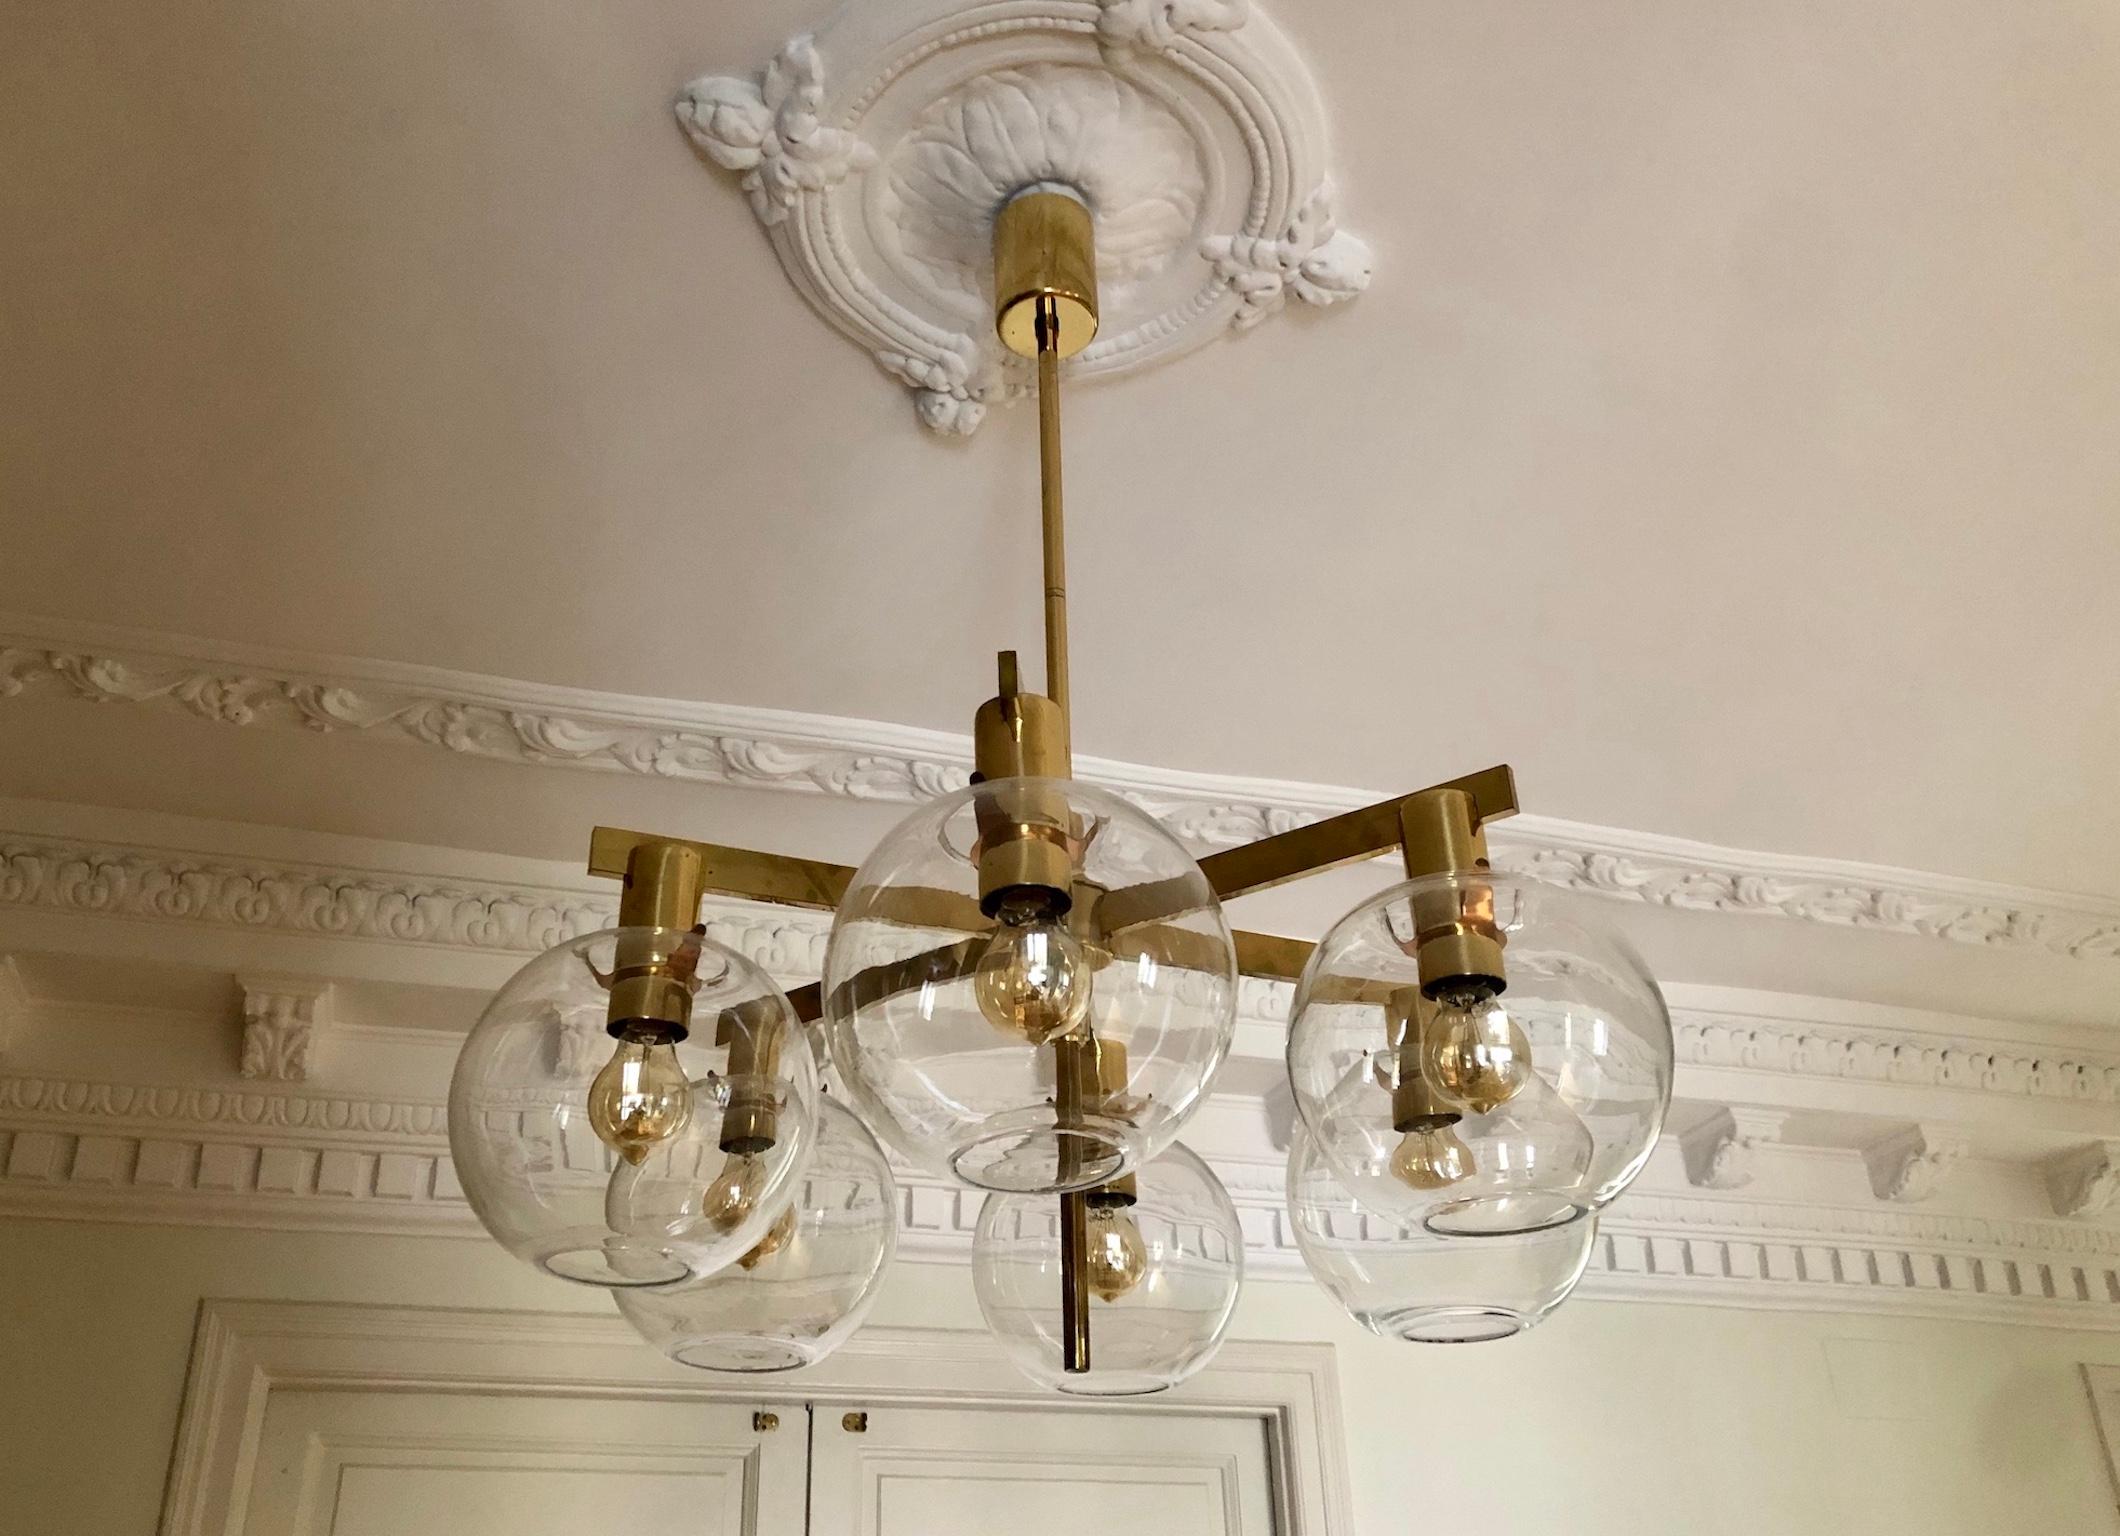 Brass ceiling lamp with six arms and round glass globes, model T-348/6, designed by Hans-Agne Jakobsson and produced in his studio in Markaryd, Sweden. Labelled.